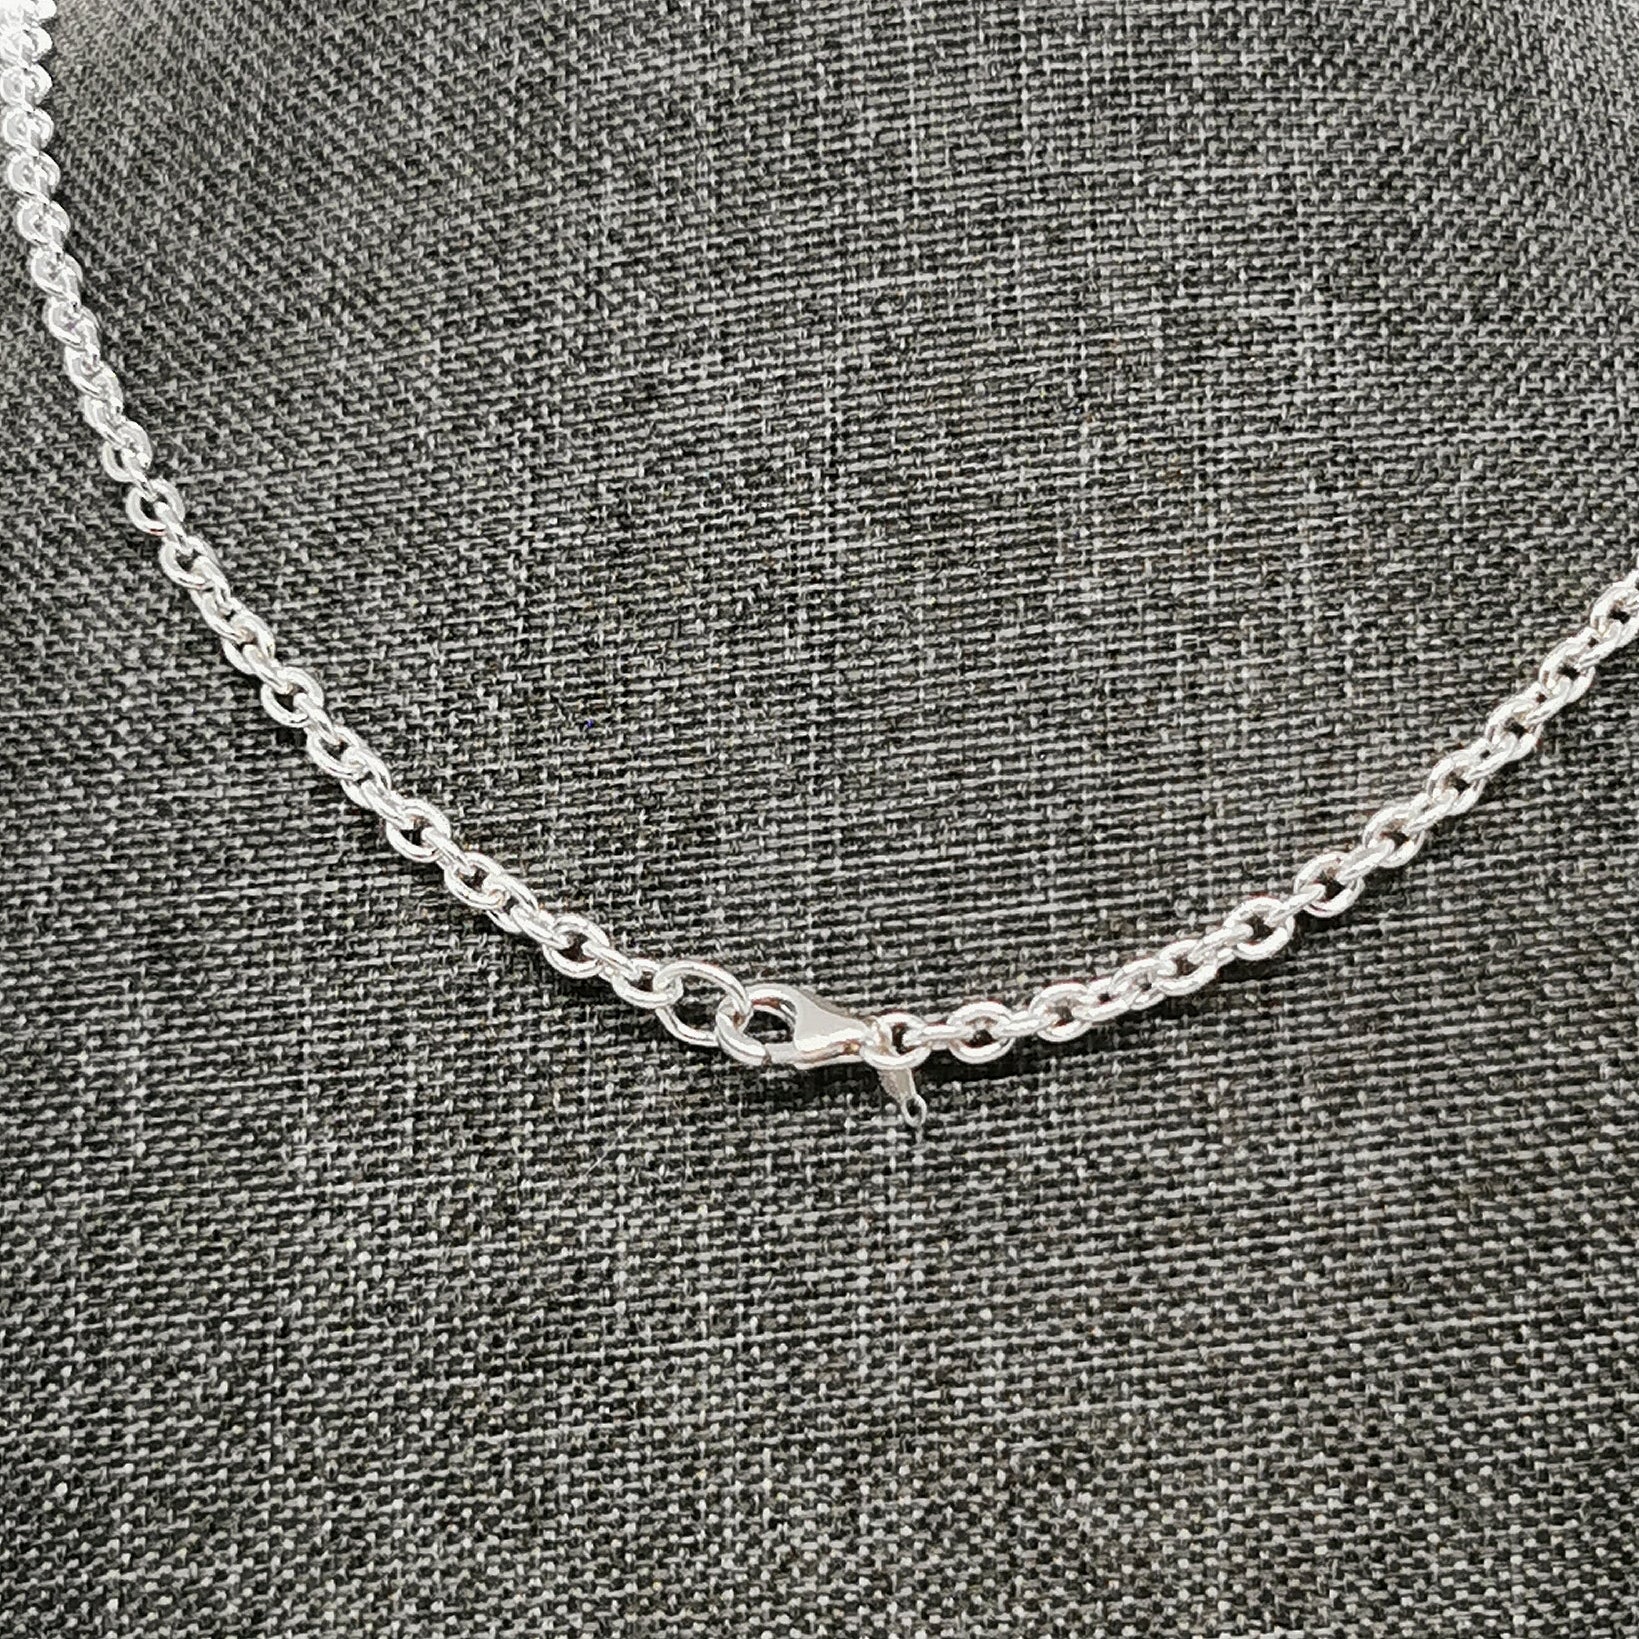 Sterling Silver 4mm Oval Trace Cable Style Chain, 4mm jewelry chain, 4mm links chain, 4mm jewellery chain, 4mm chain necklace, 4mm chain necklace in silver, necklace chains, silver necklace chains, big link chains, sterling silver chain necklace, sterling silver chain, silver 4mm chain, silver chain jewelry, silver chain jewellery, chain for pendant in silver